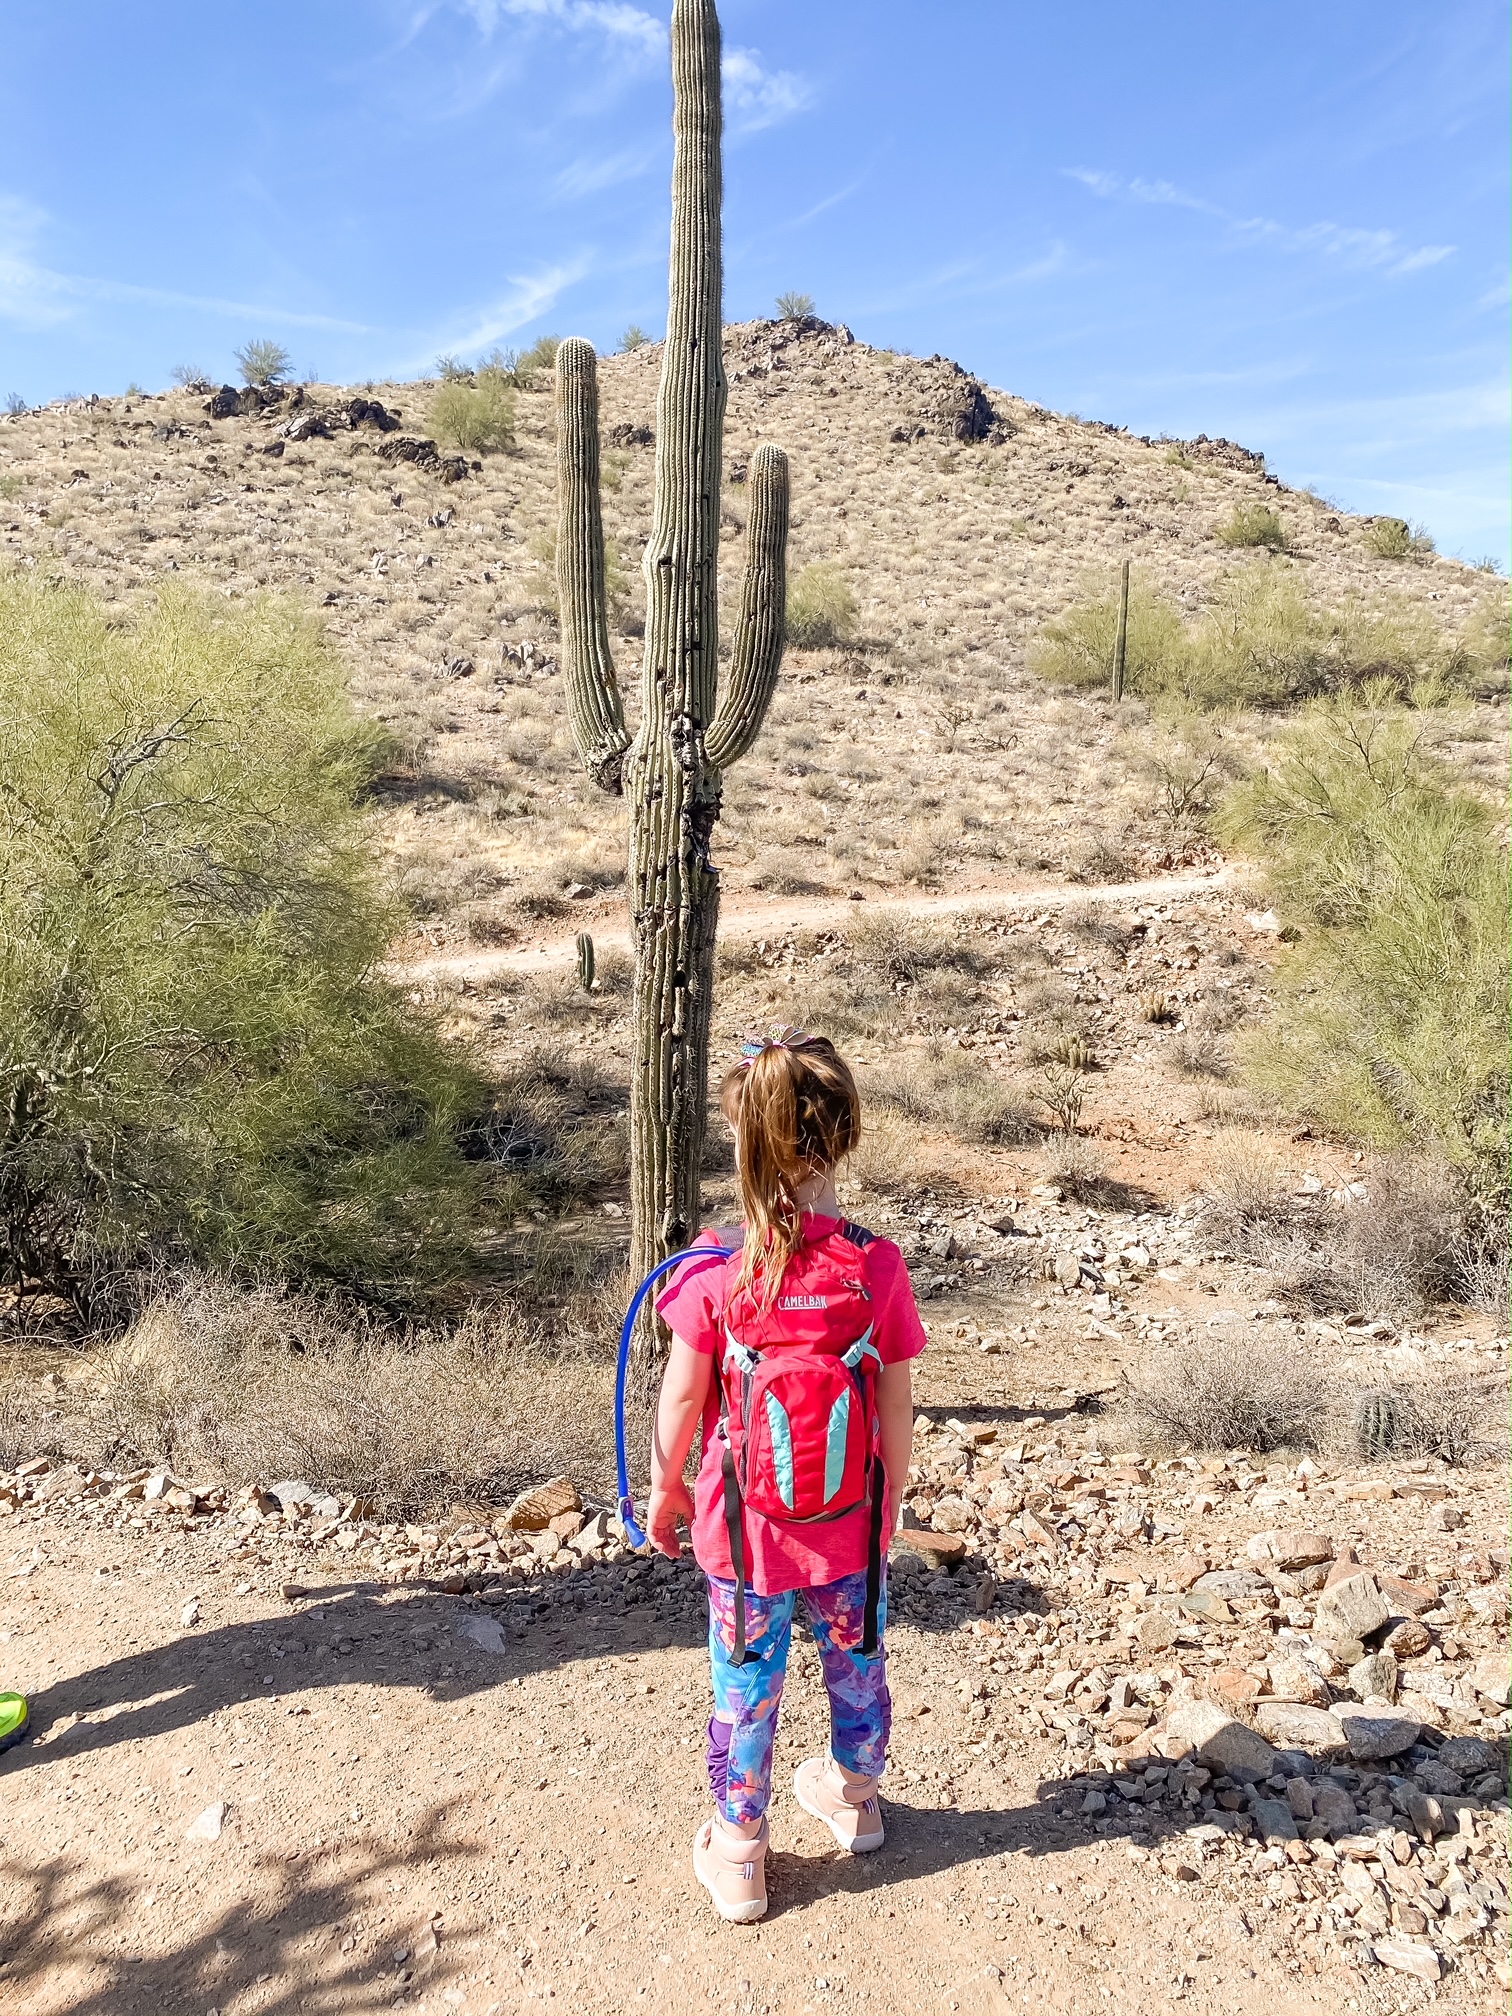 Little girl on a desert hike by a large saguaro cactus